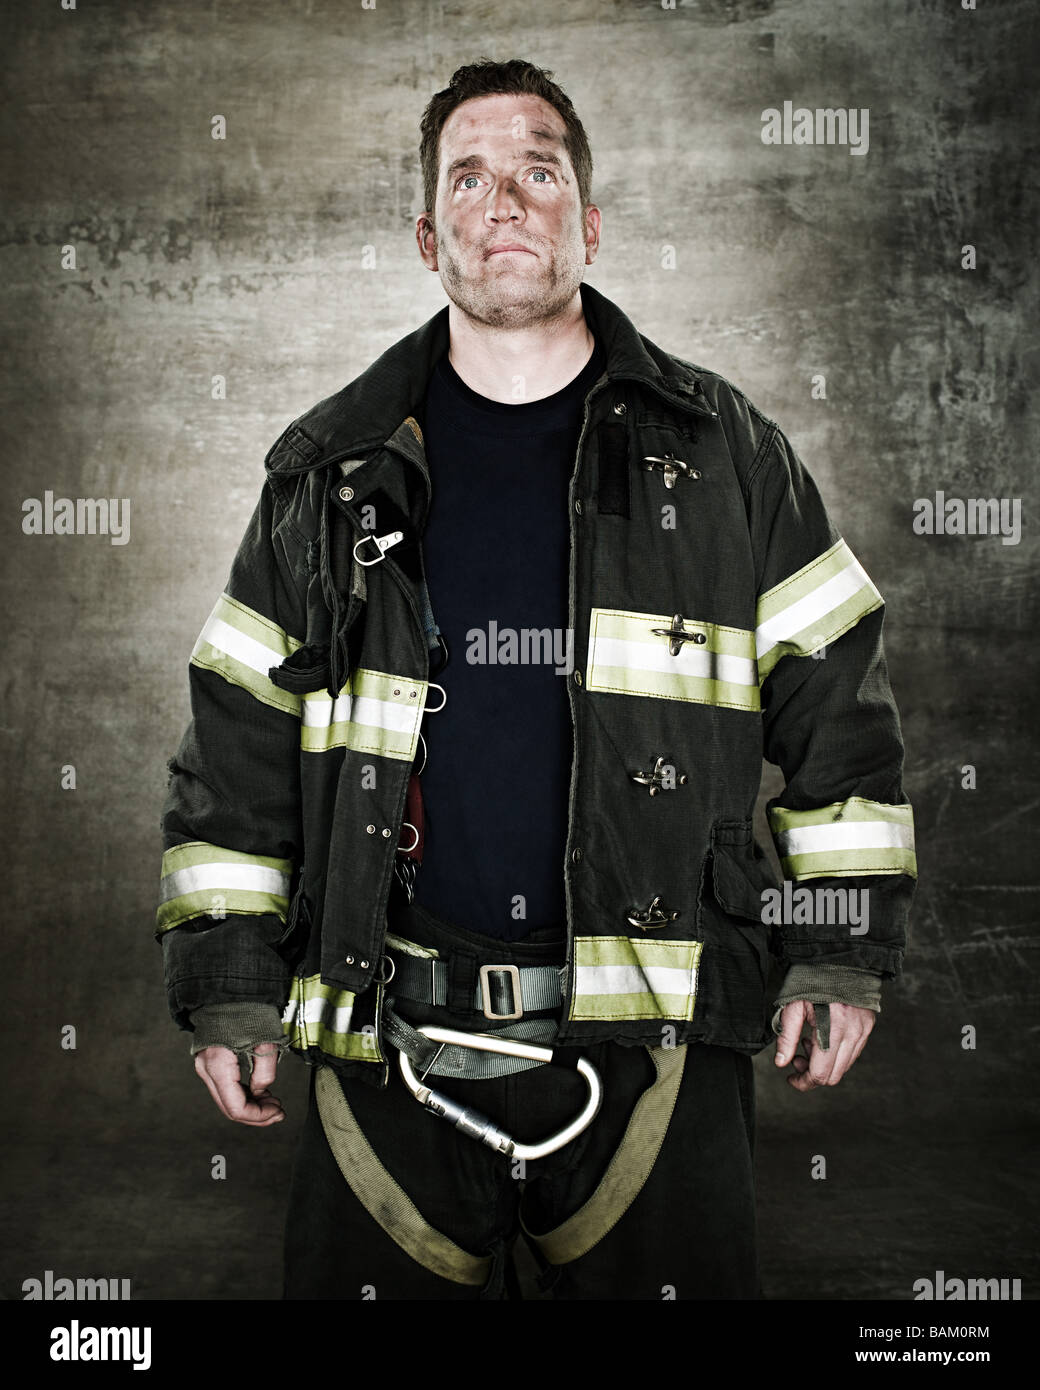 Portrait of a firefighter Stock Photo